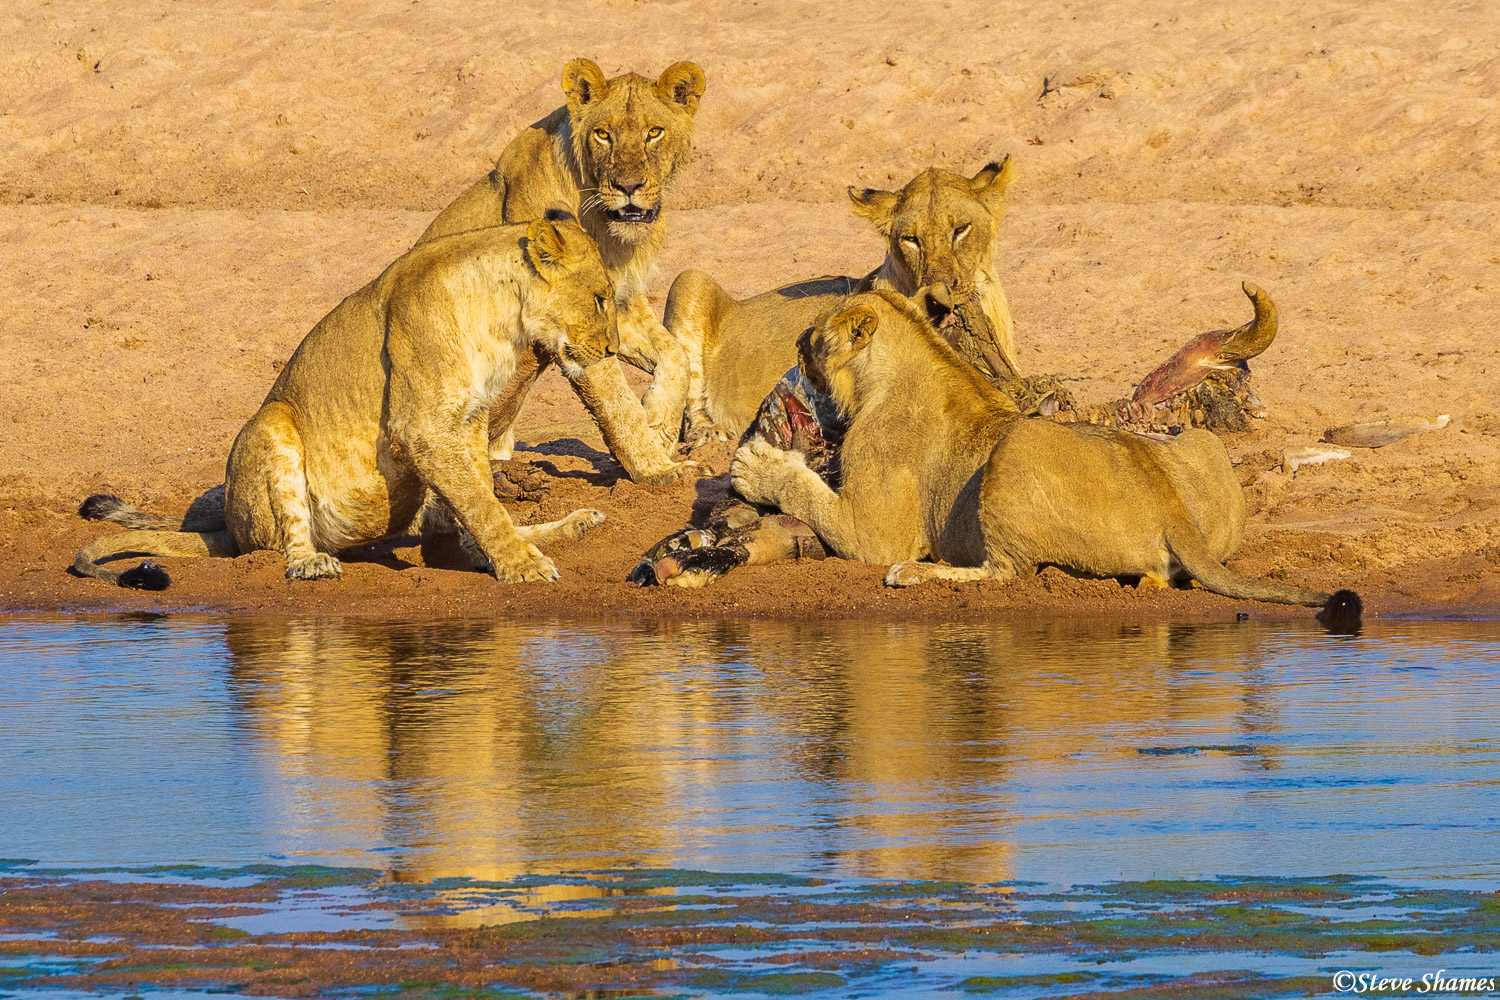 Two days later, the lions were still eating the buffalo carcasses by the river.